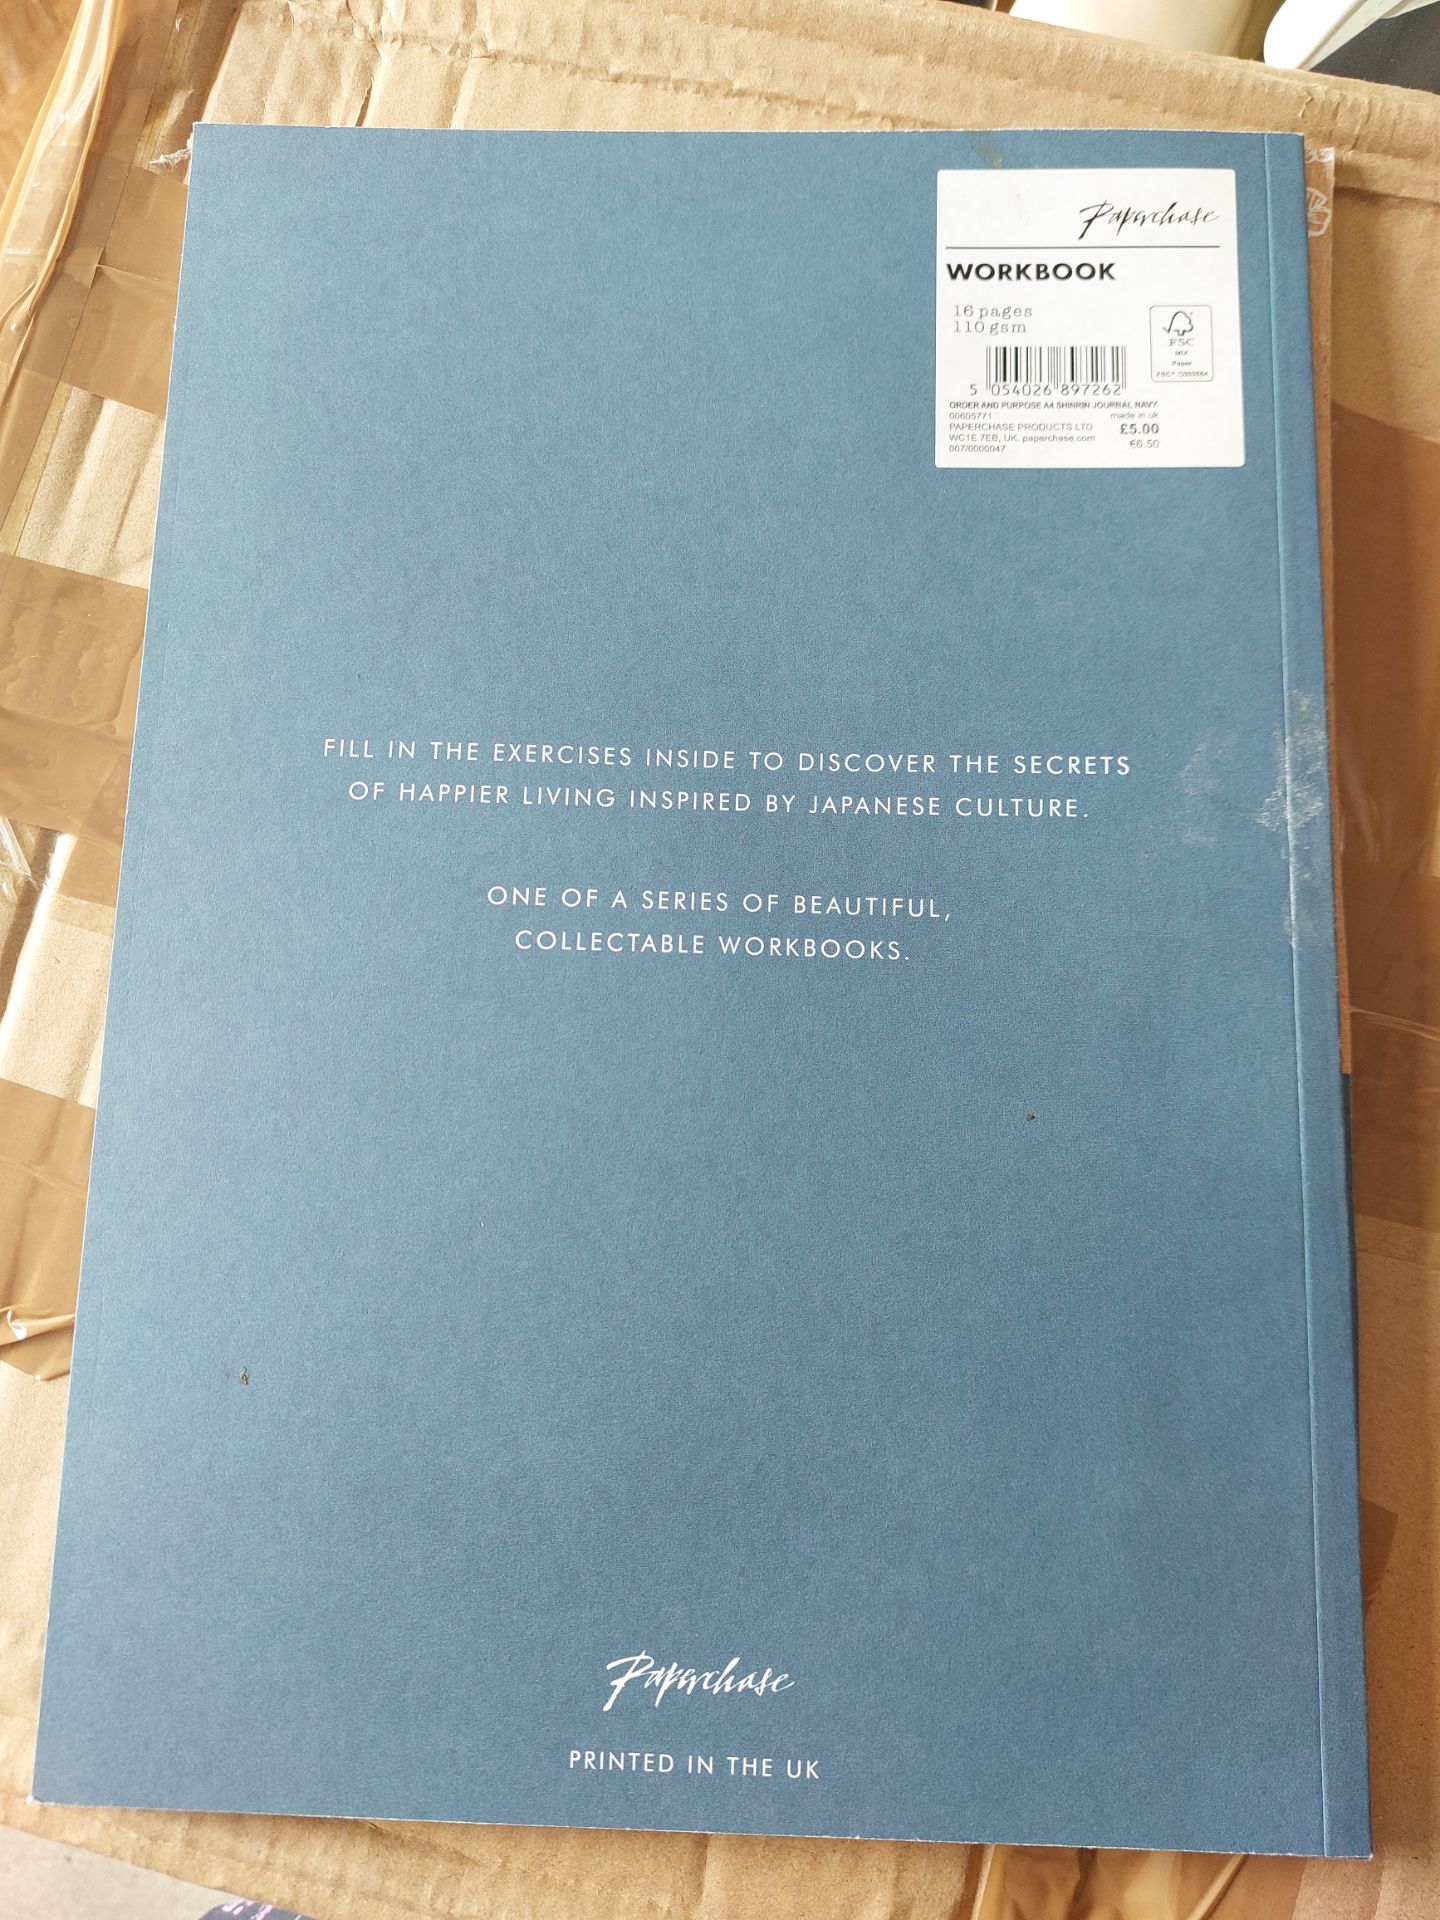 Paperchase Shinrin Workbooks Several Boxes RRP £500. Total More Than 100 Books - Image 6 of 7